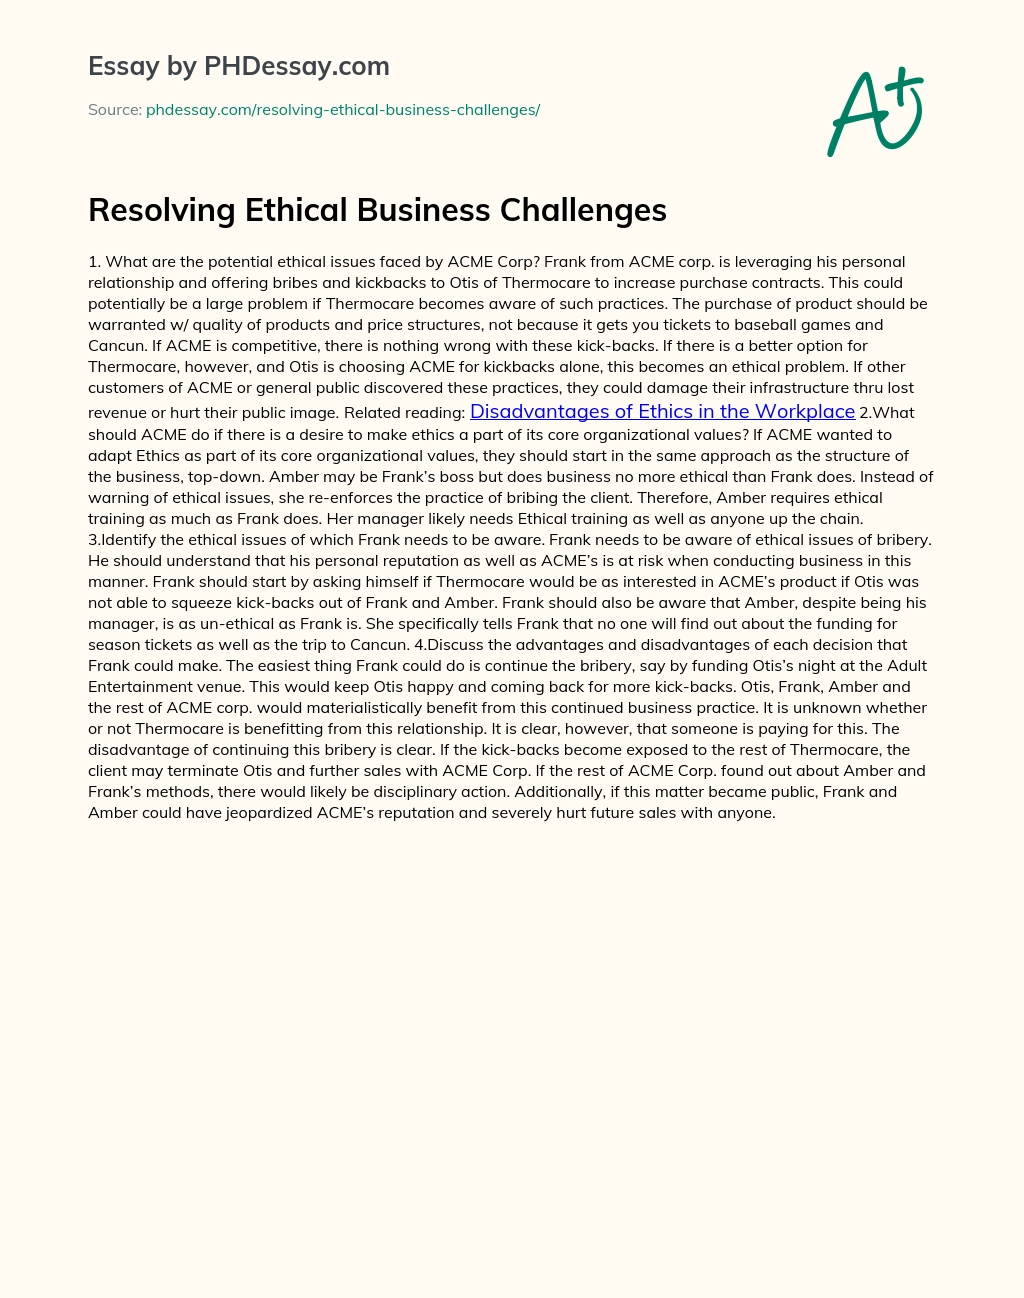 Resolving Ethical Business Challenges essay